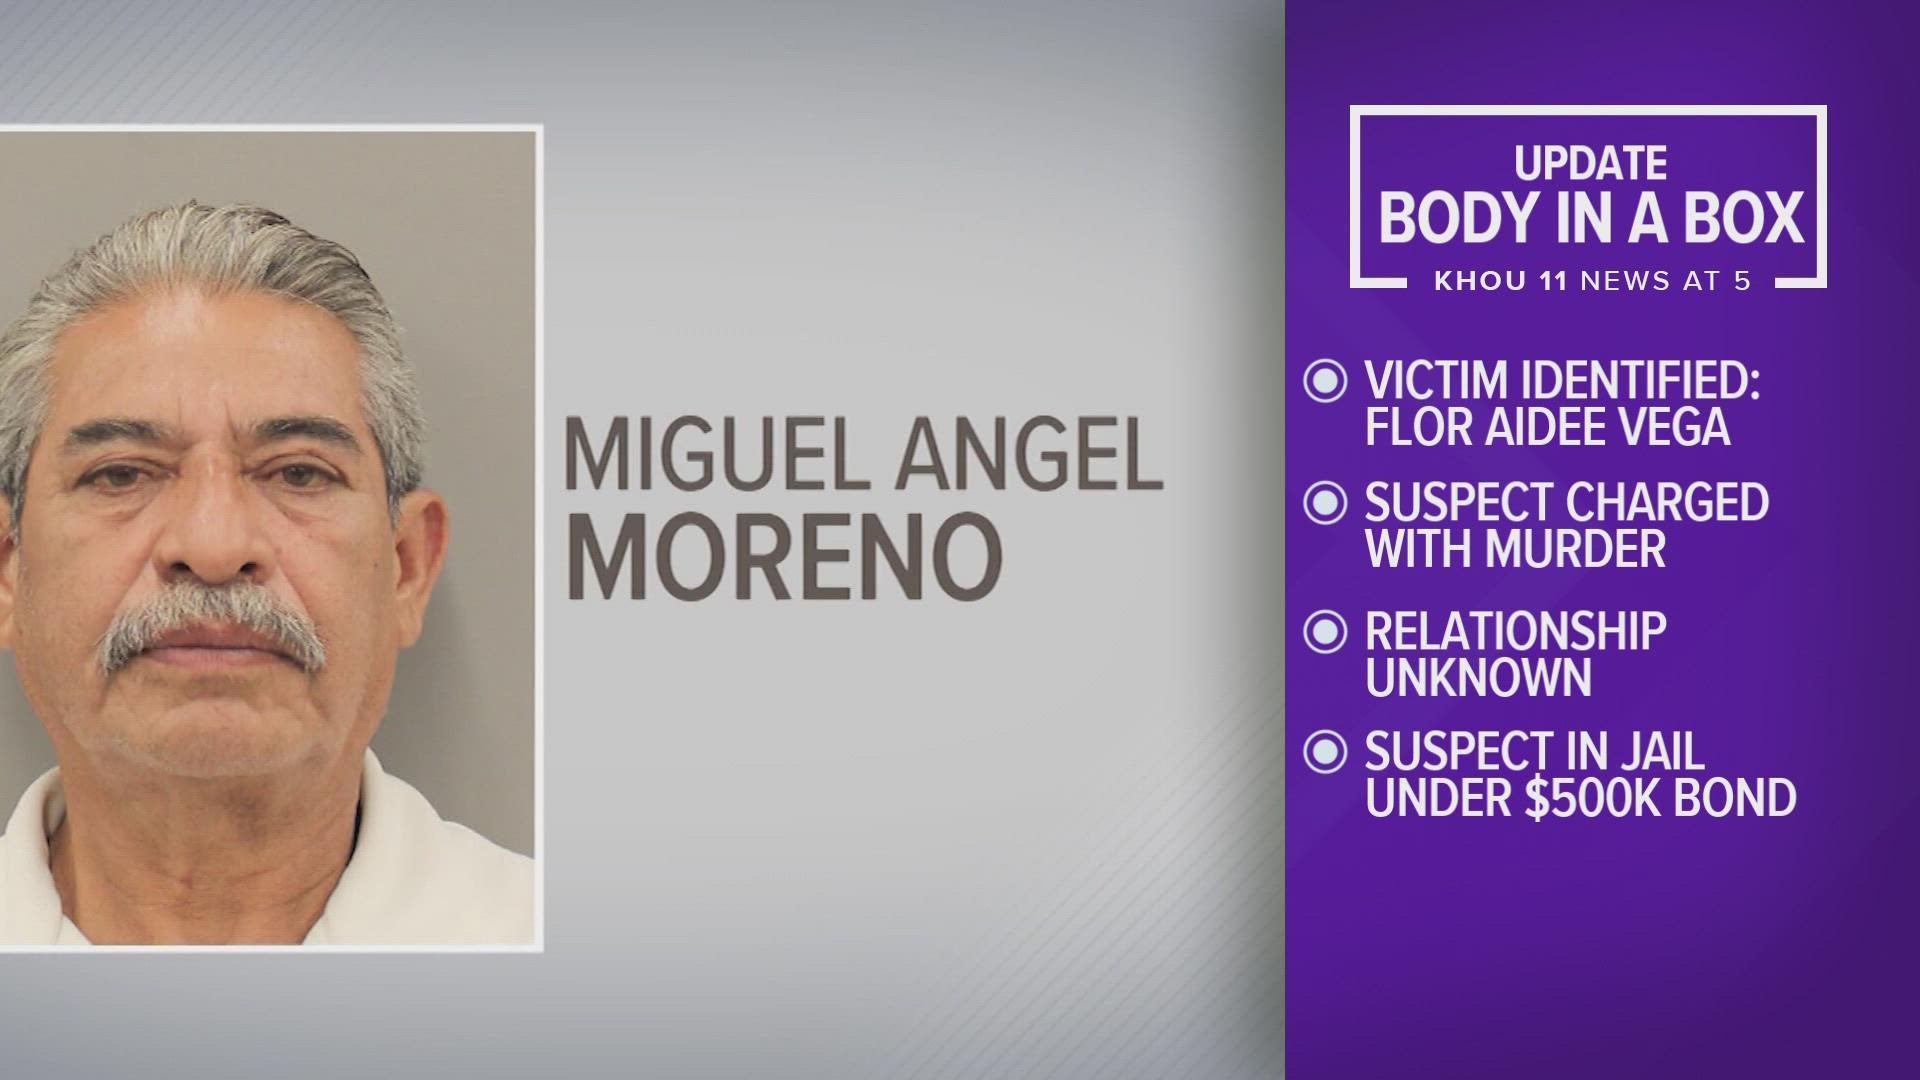 Miguel Angel Moreno is now charged with murder the death of Flor Aidee Vega.